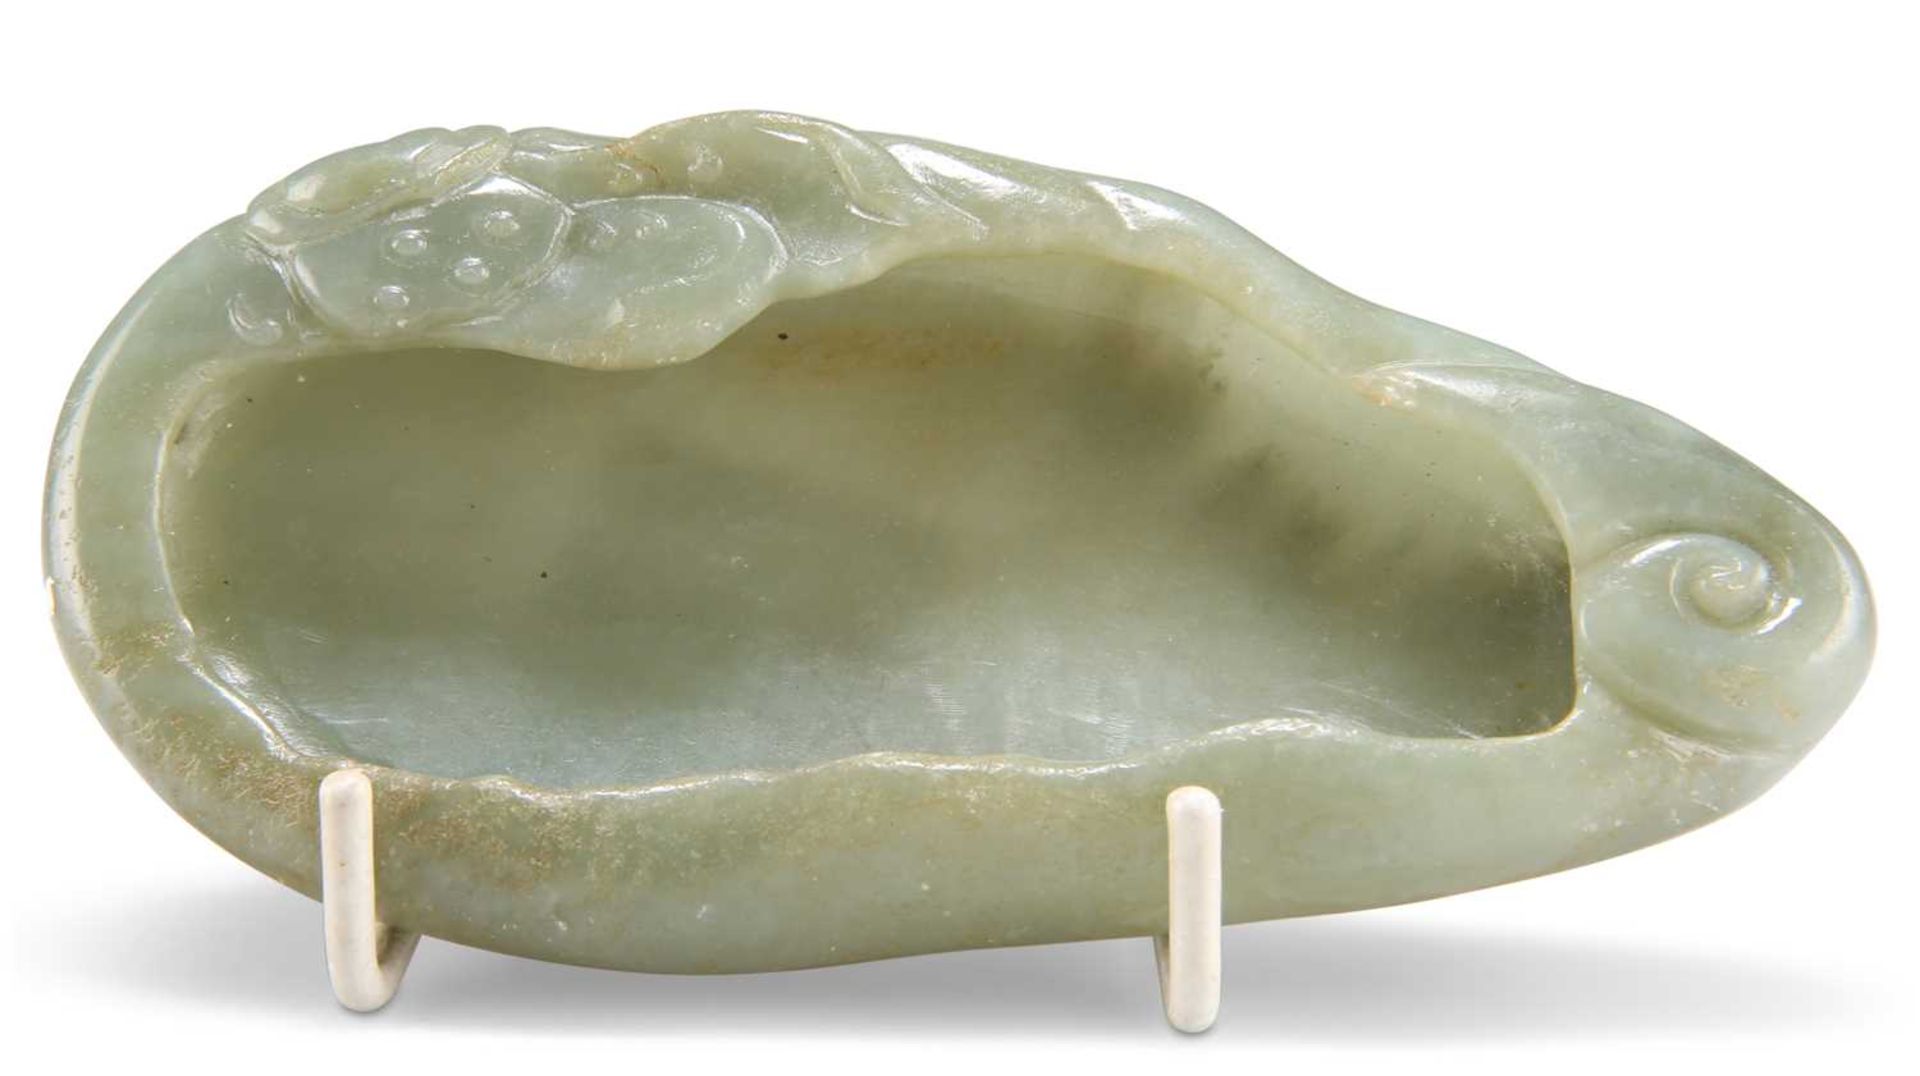 A CARVED JADE LOTUS BRUSH WASHER